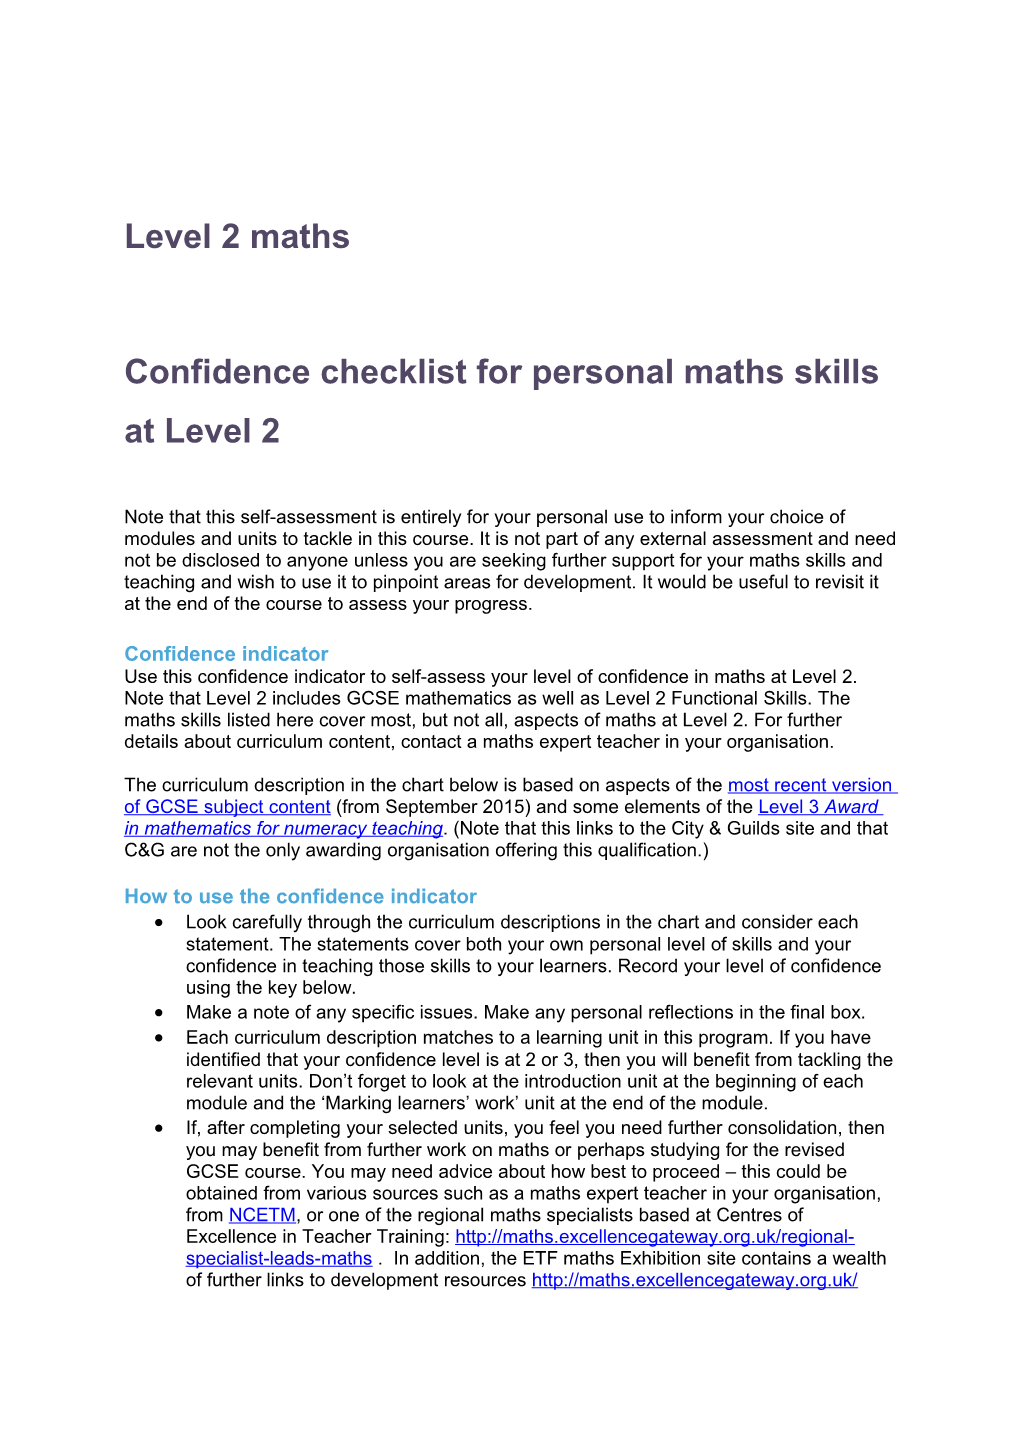 Confidence Checklistfor Personal Maths Skills at Level 2